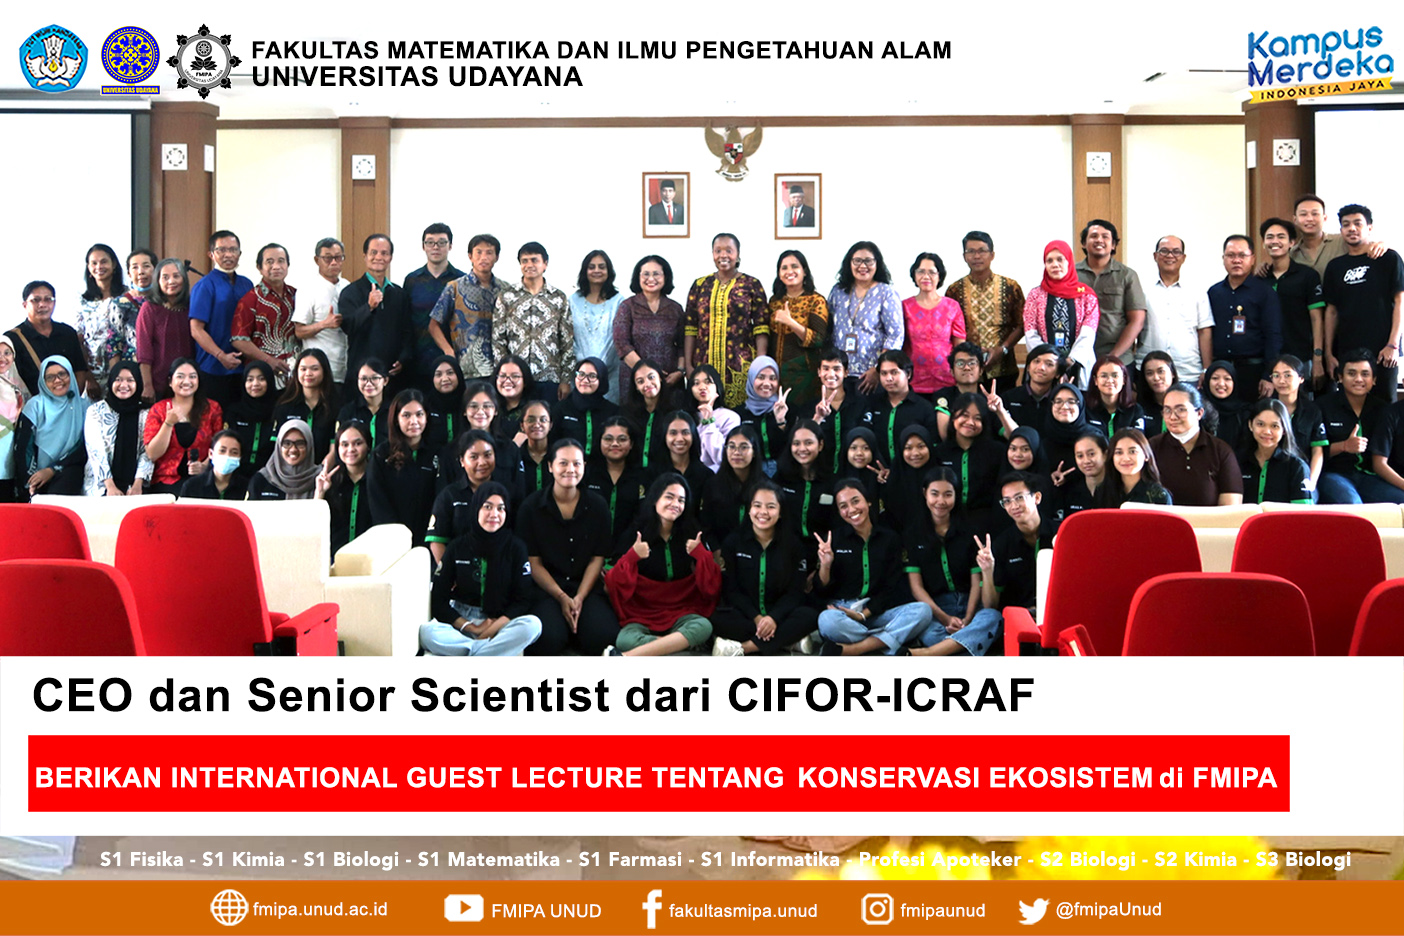 CEO and Senior Scientist from CIFOR-ICRAF gave a international guest lecture on ecosystem conservation at FMIPA